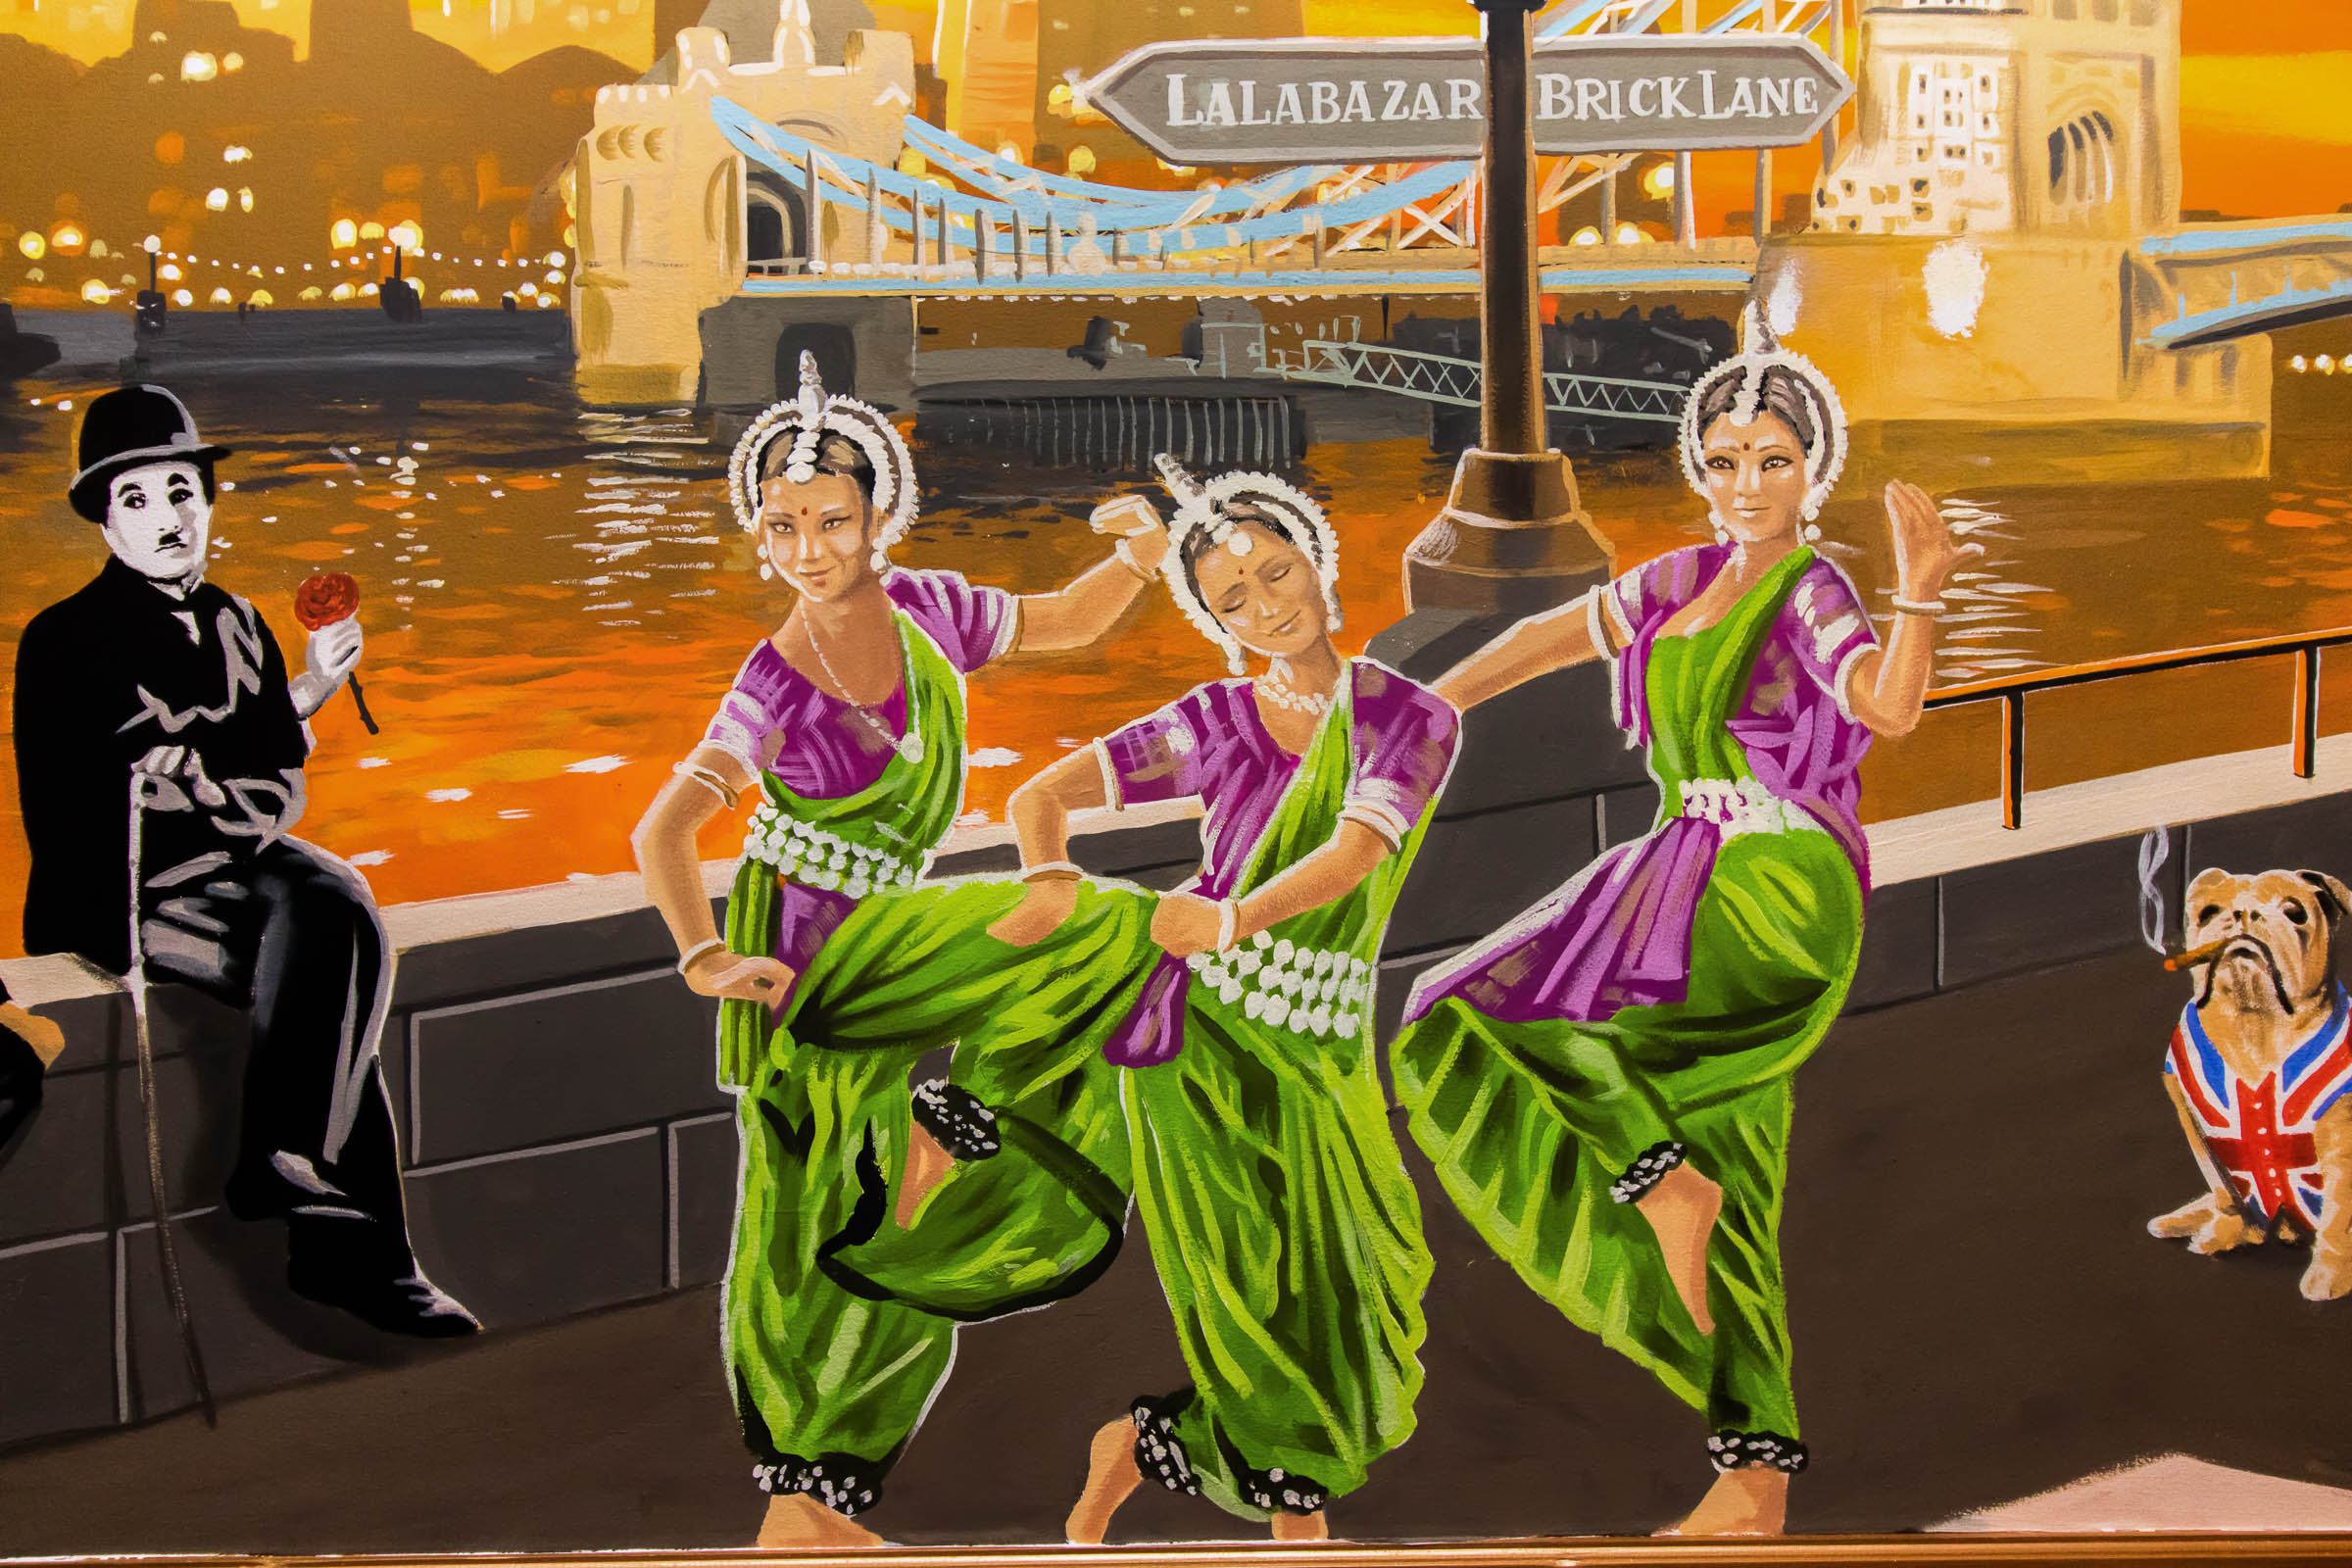 Aladin Mural Restaurant in Brick Lane - Indian Dancers beside the Thames by Charlie Chaplin and Tower Bridge